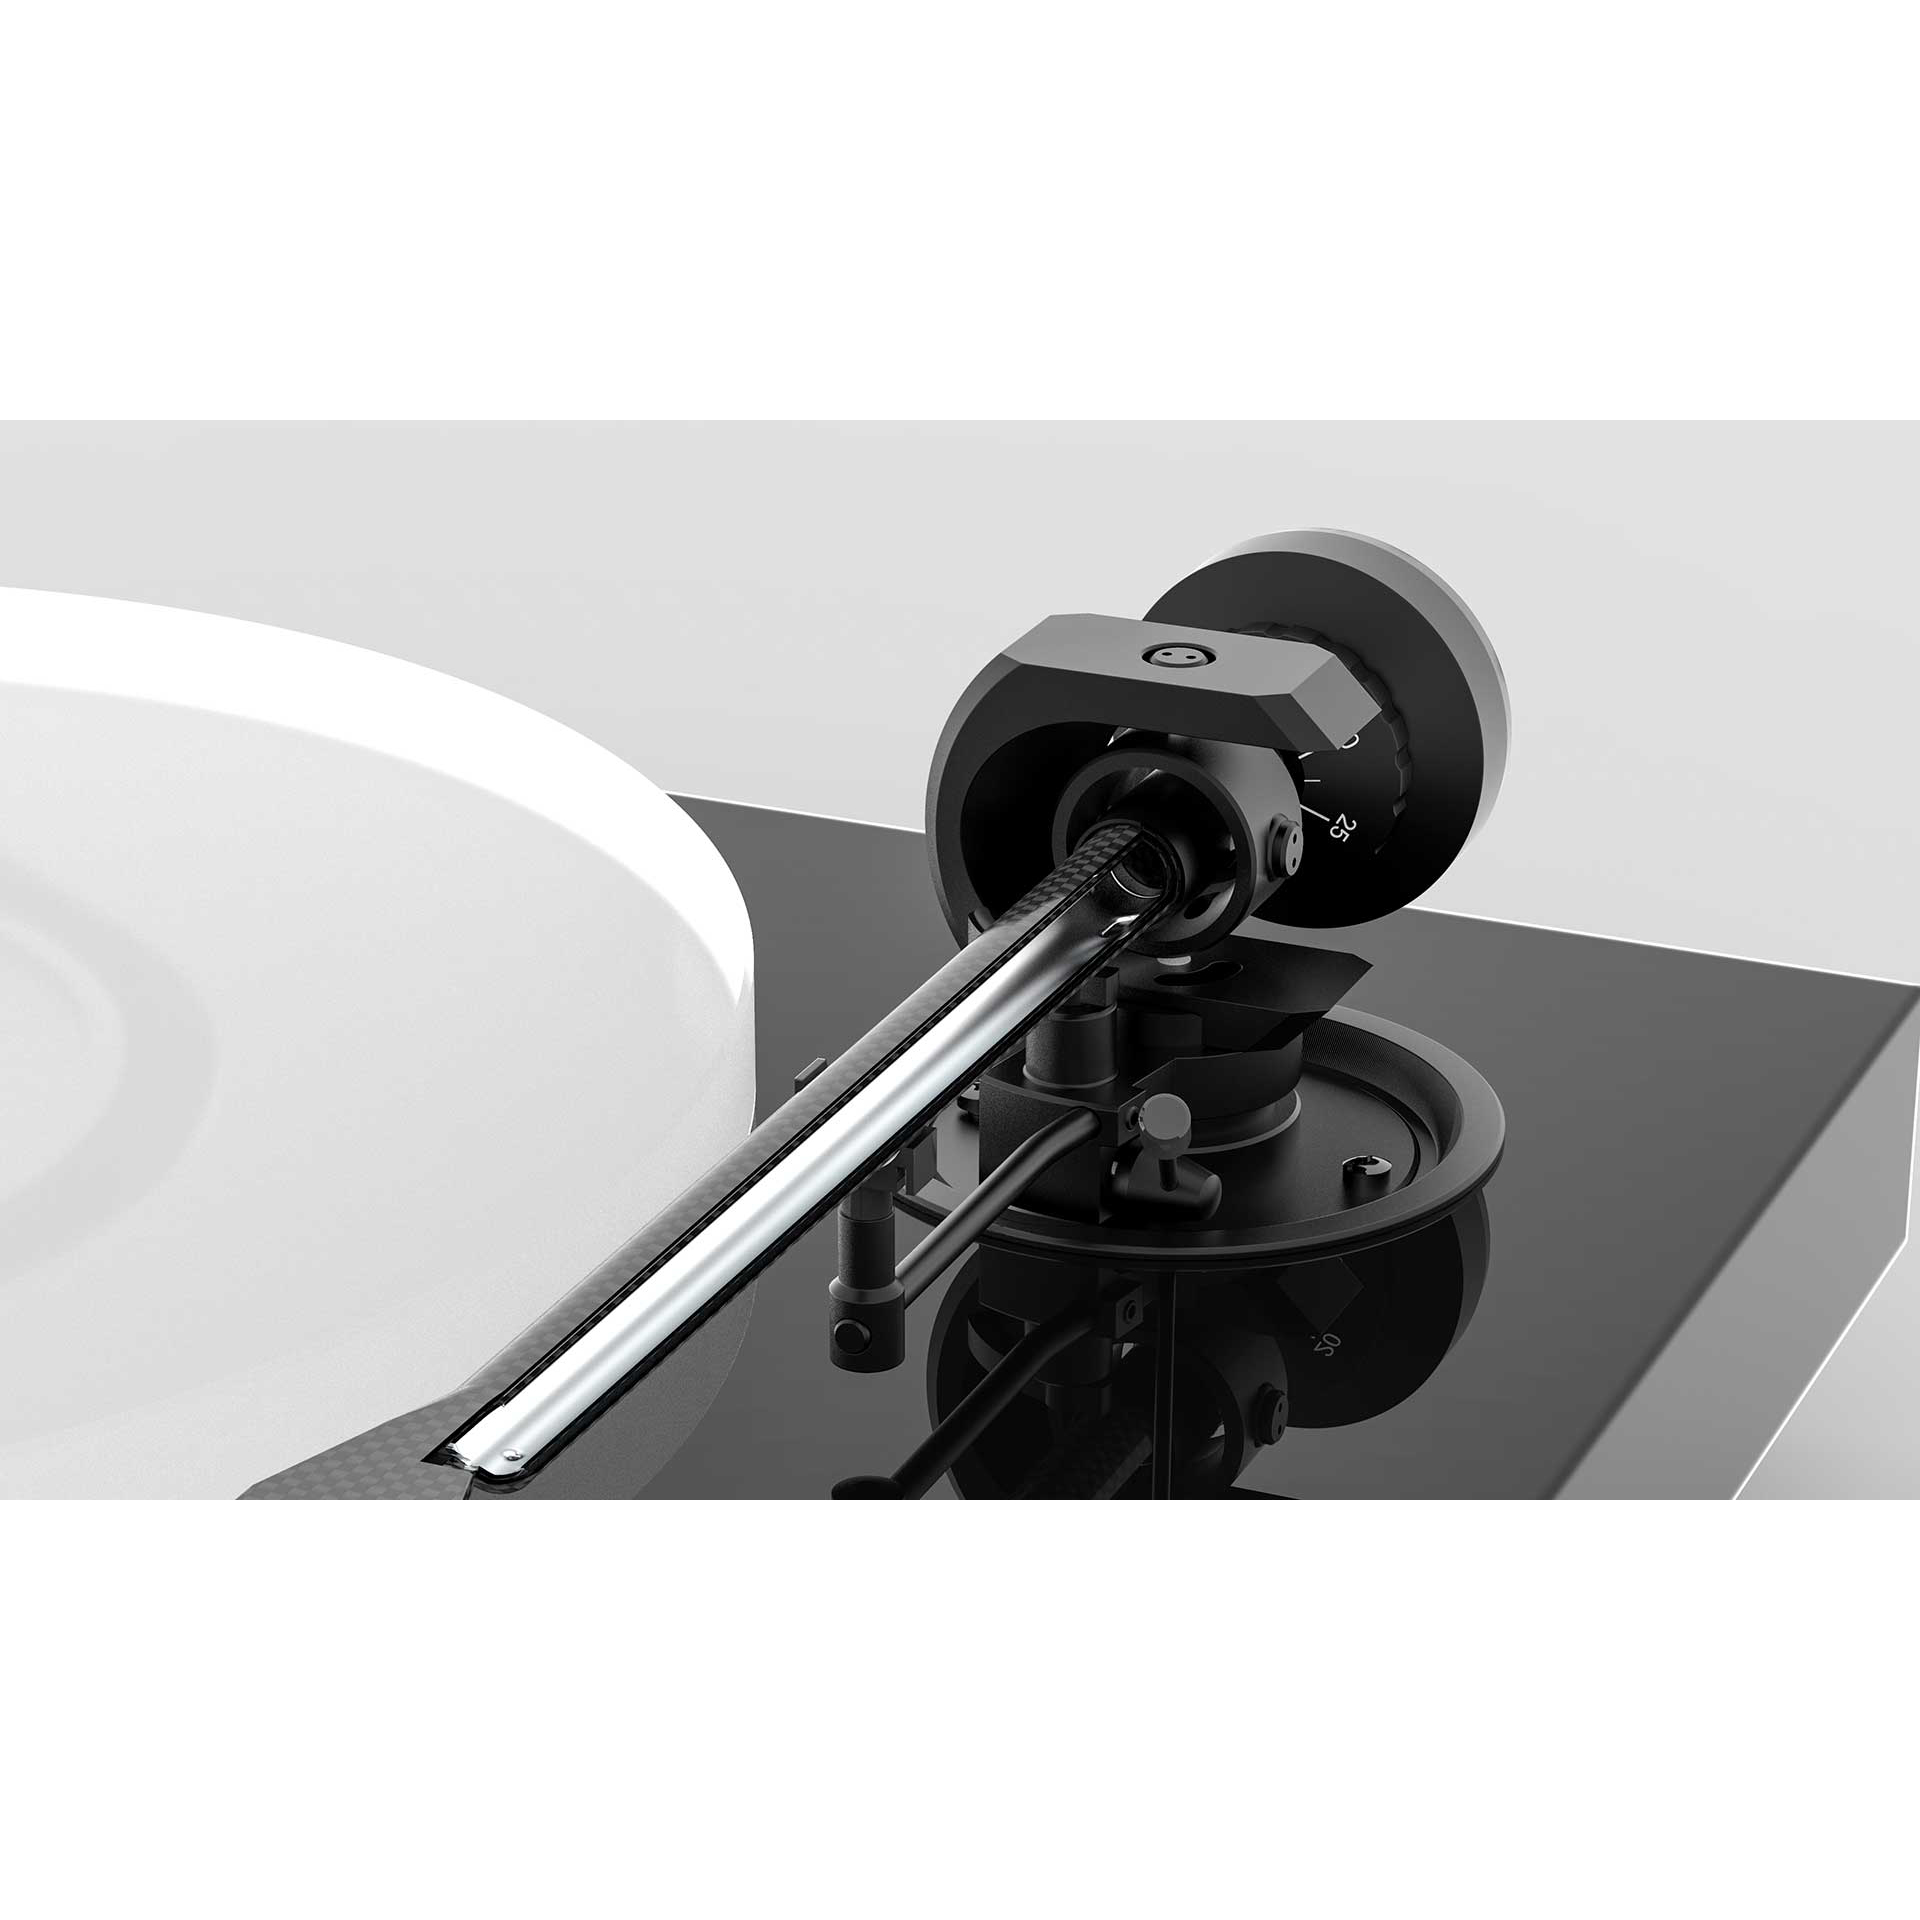 Pro ject pick it pro. Pro Ject Turntable. Pro-Ject 1-Xpression III Comfort. Проигрыватель винила Pro-Ject. Pro-Ject pick it 25a.